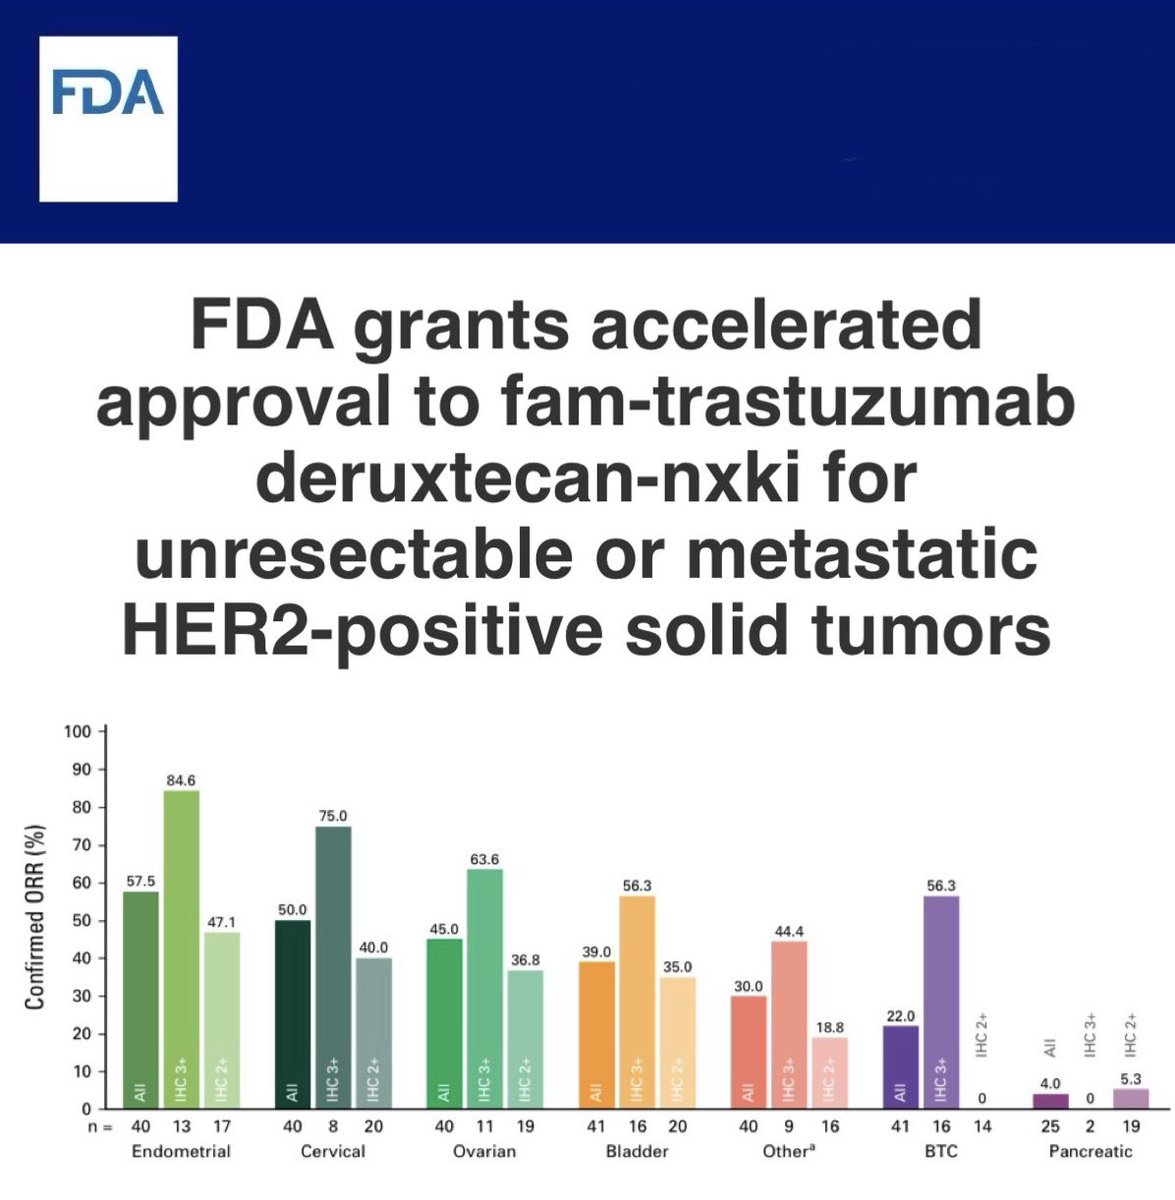 T-DXd is approved for the treatment of patients with ANY treatment-refractory HER2+ (IHC 3+) tumor, making of it the first agnostic ADC. Unlikely to be the last. Key priority: ensuring that HER2 testing is expanded across cancer types. Exciting times! fda.gov/drugs/resource…